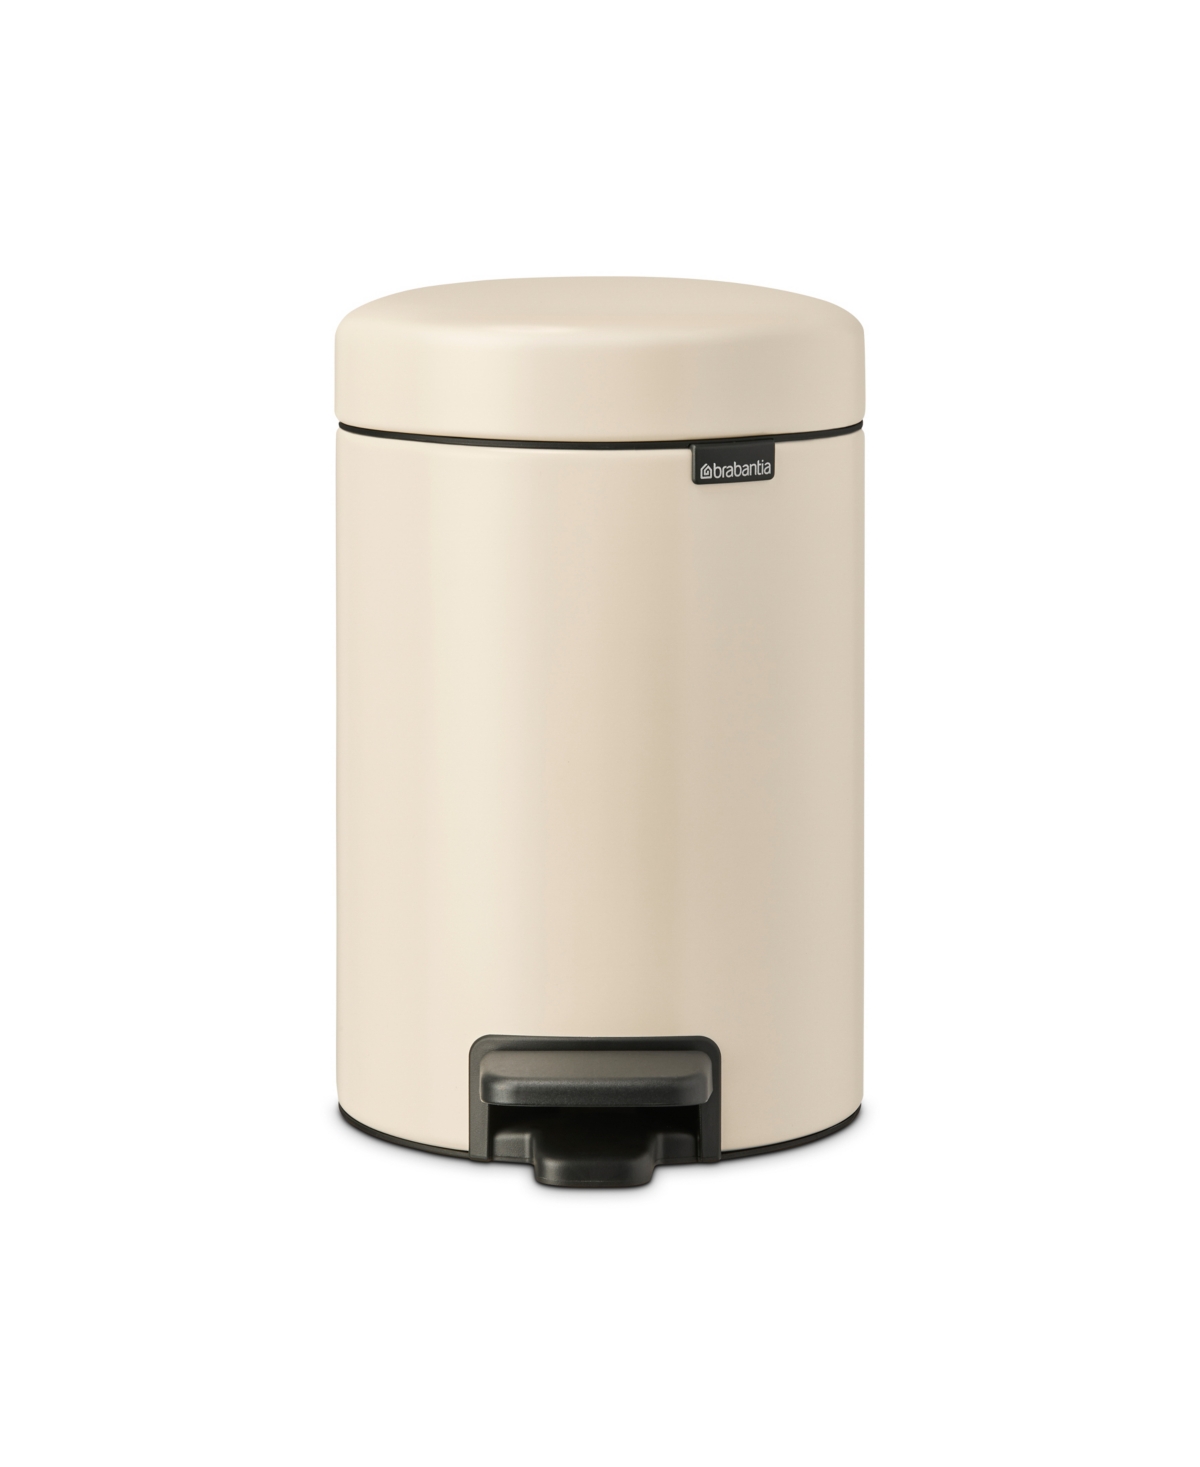 Brabantia New Icon Step On Trash Can, 0.8 Gallon, 3 Liter In Soft Beige